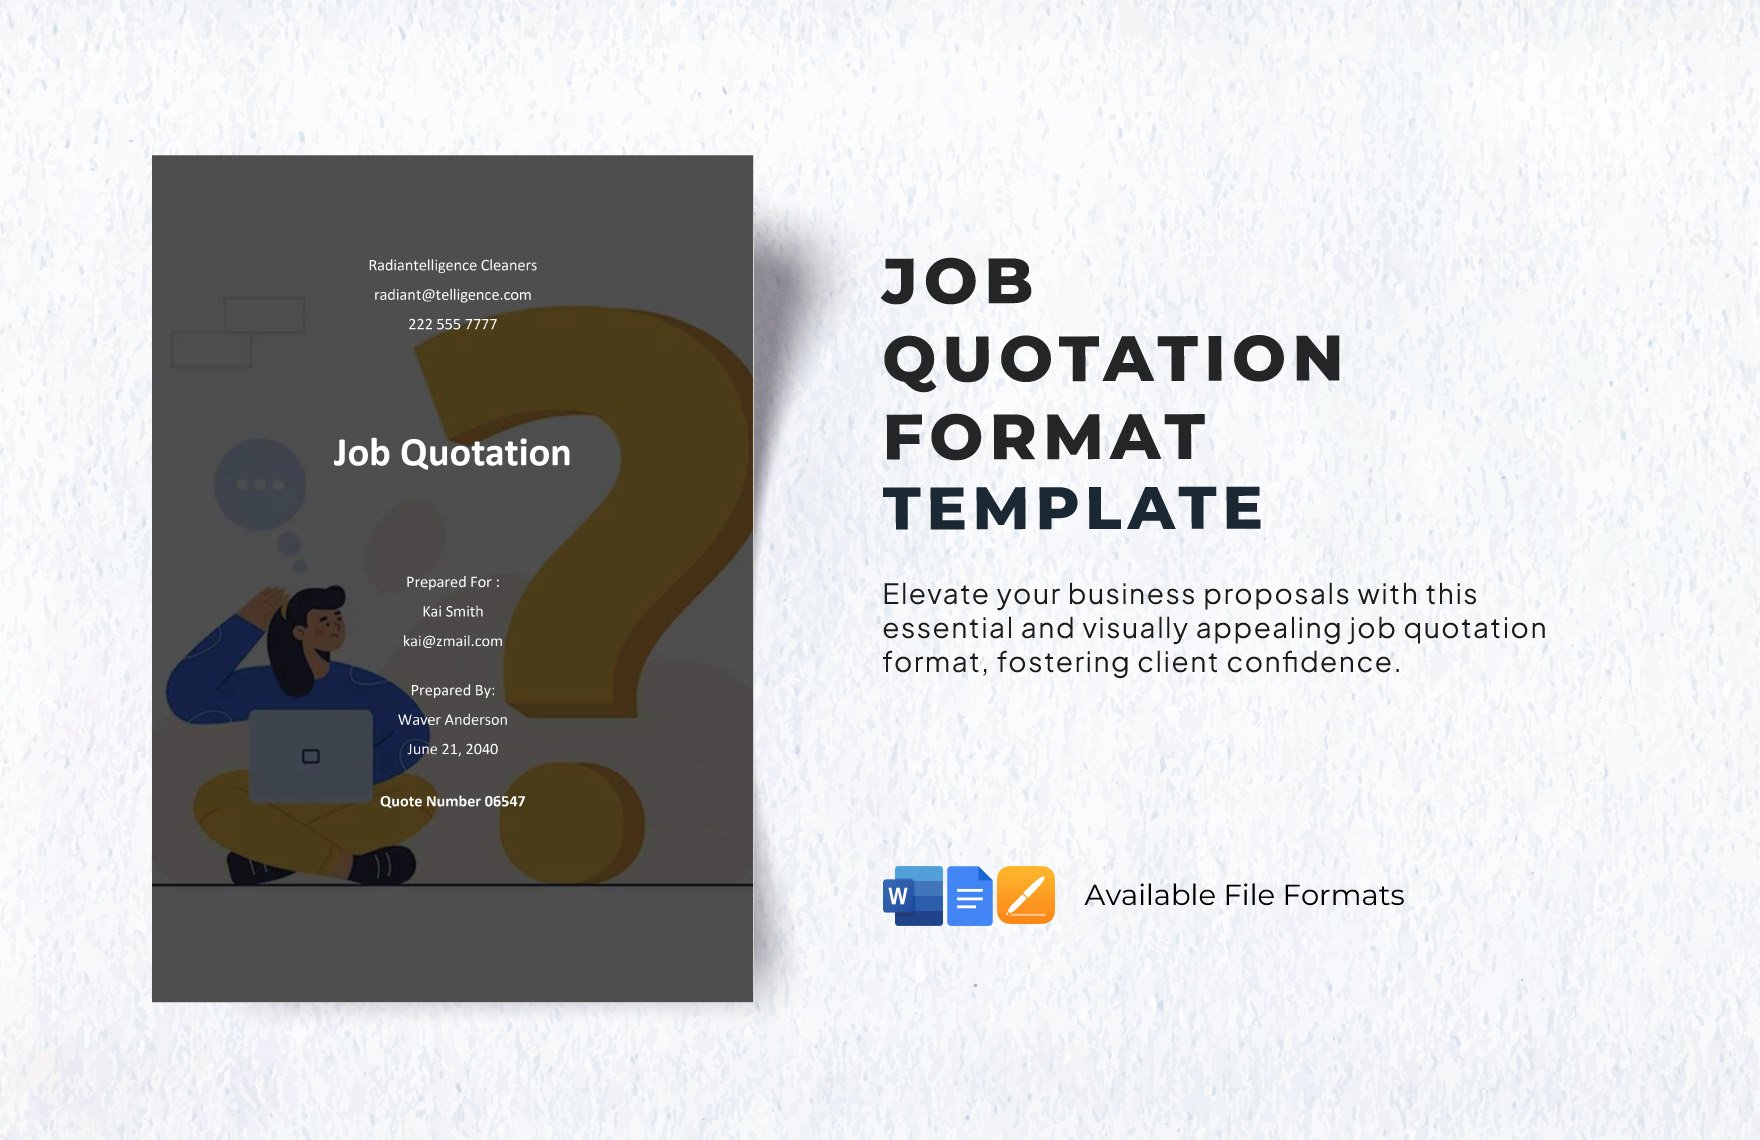 Job Quotation Format Template in Word, Google Docs, Apple Pages